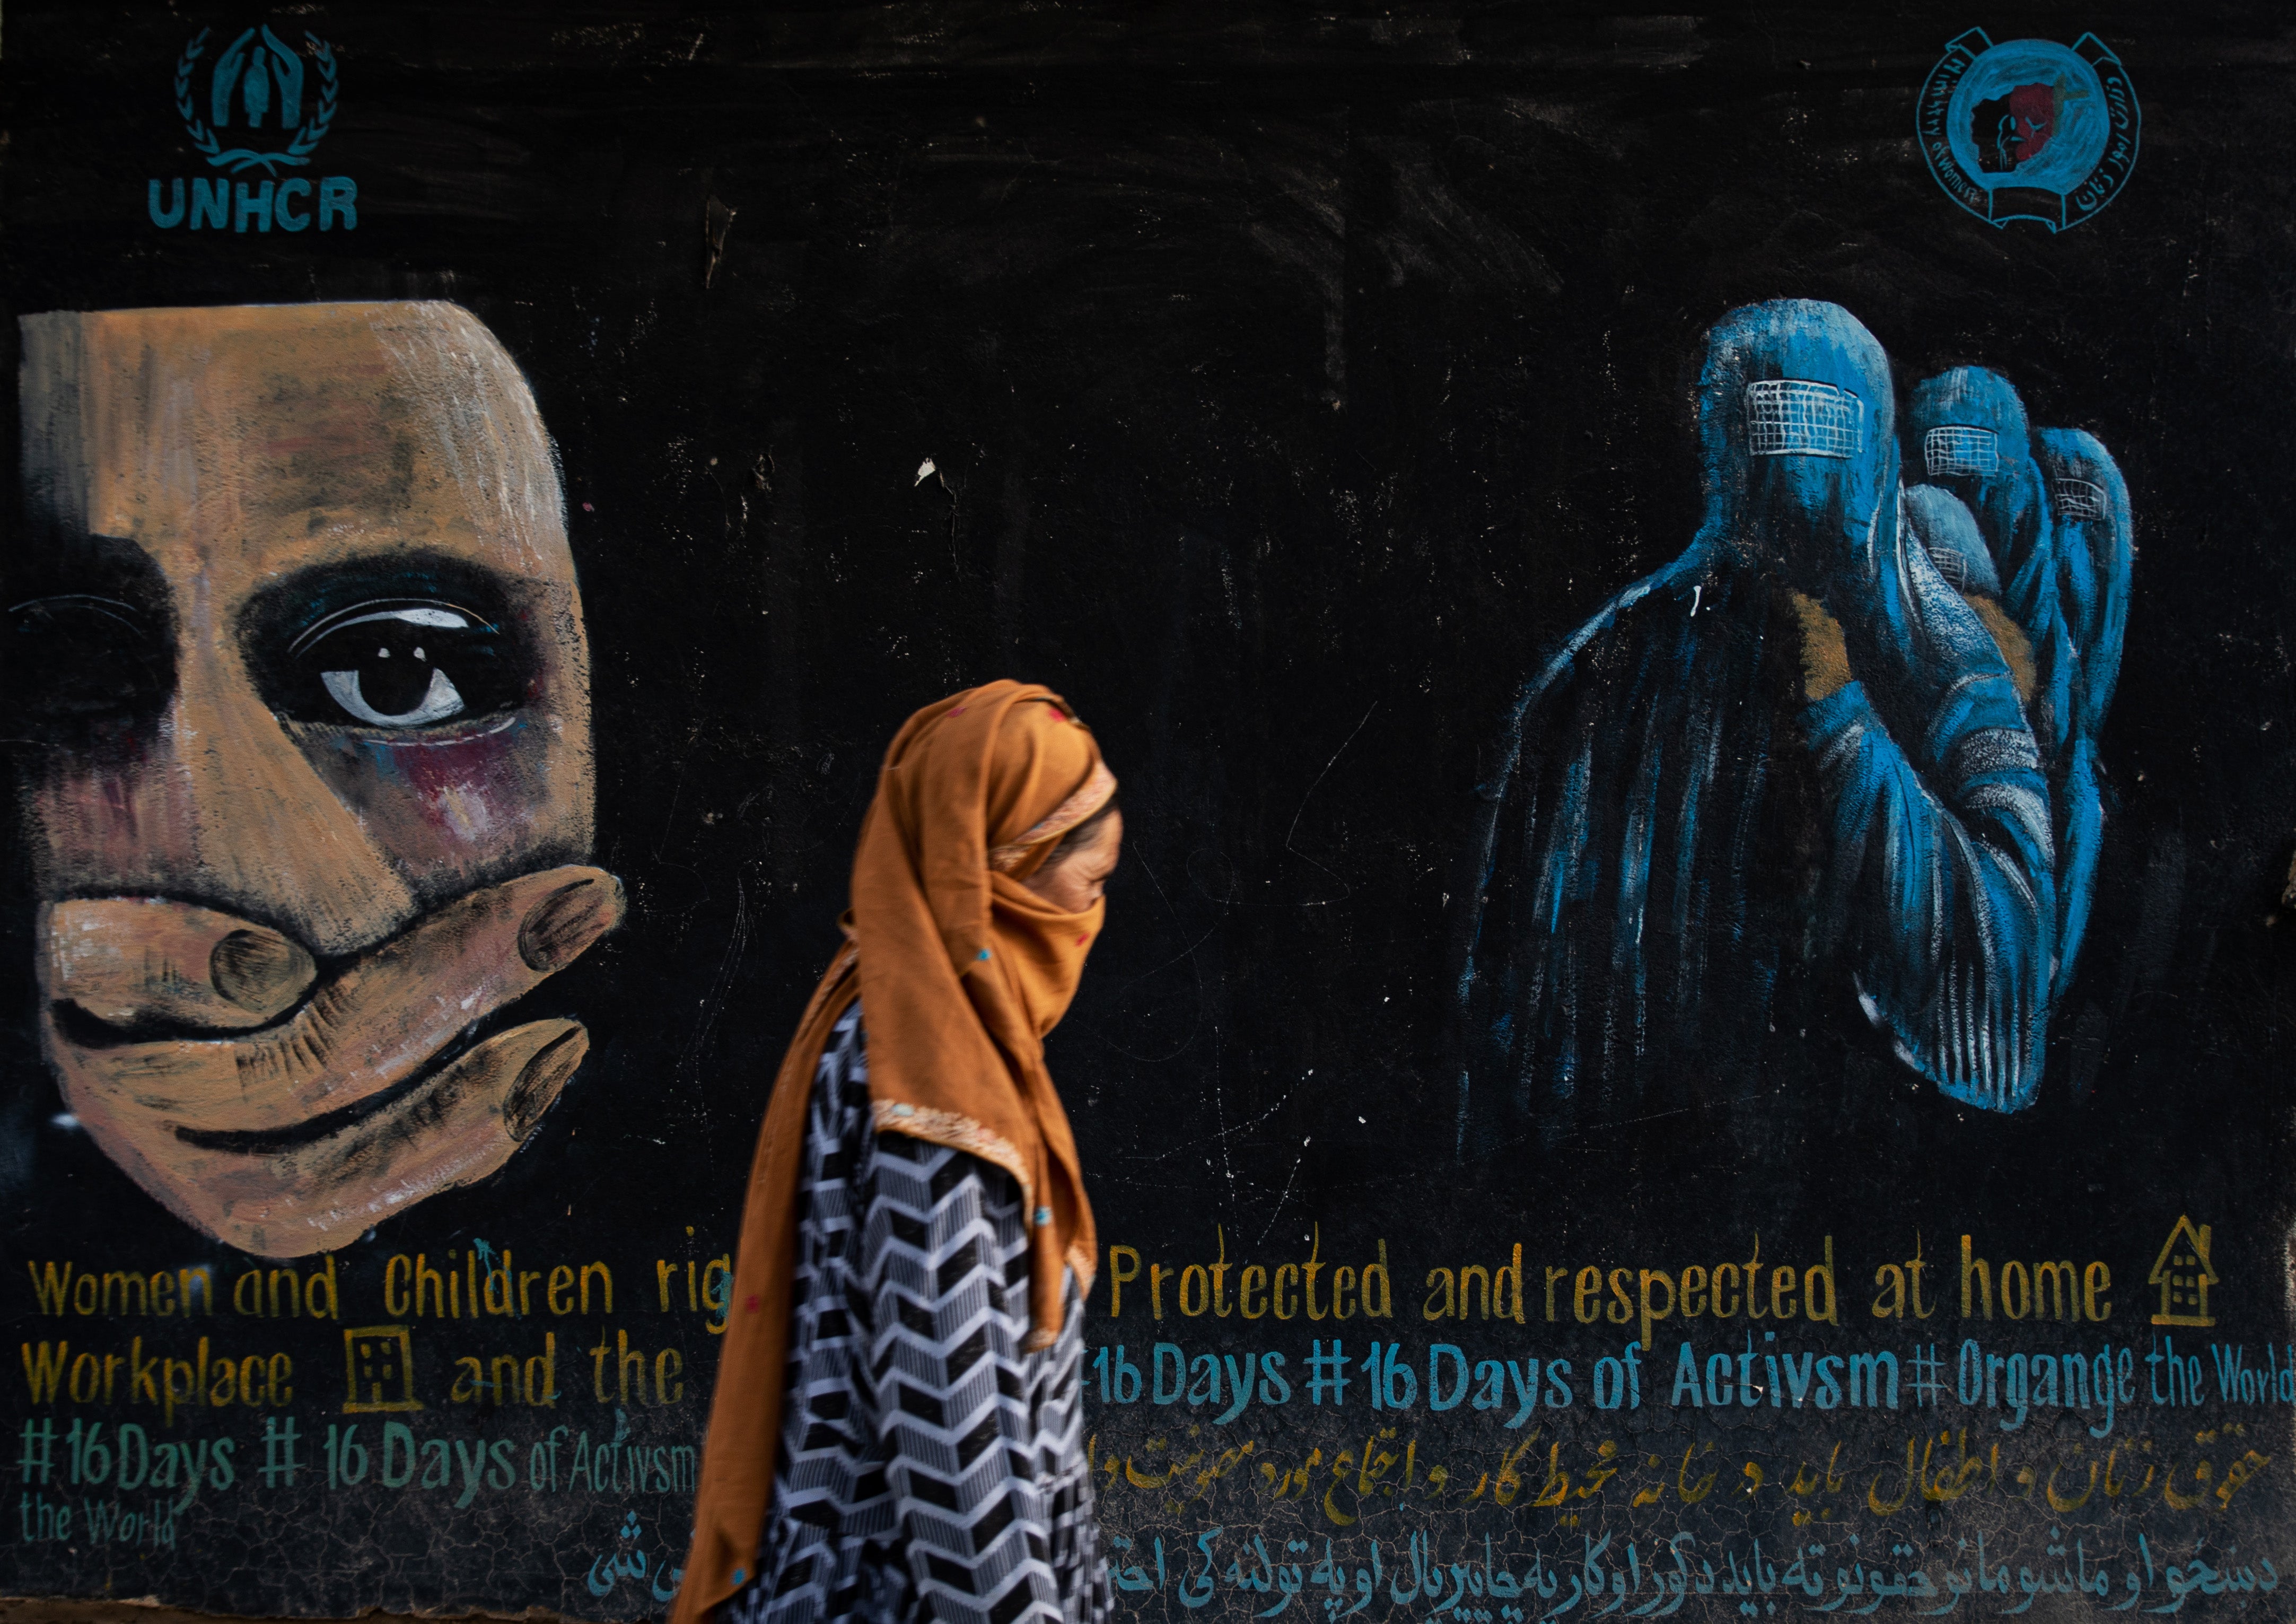 A woman walks past a mural calling for women and children’s rights in Afghanistan